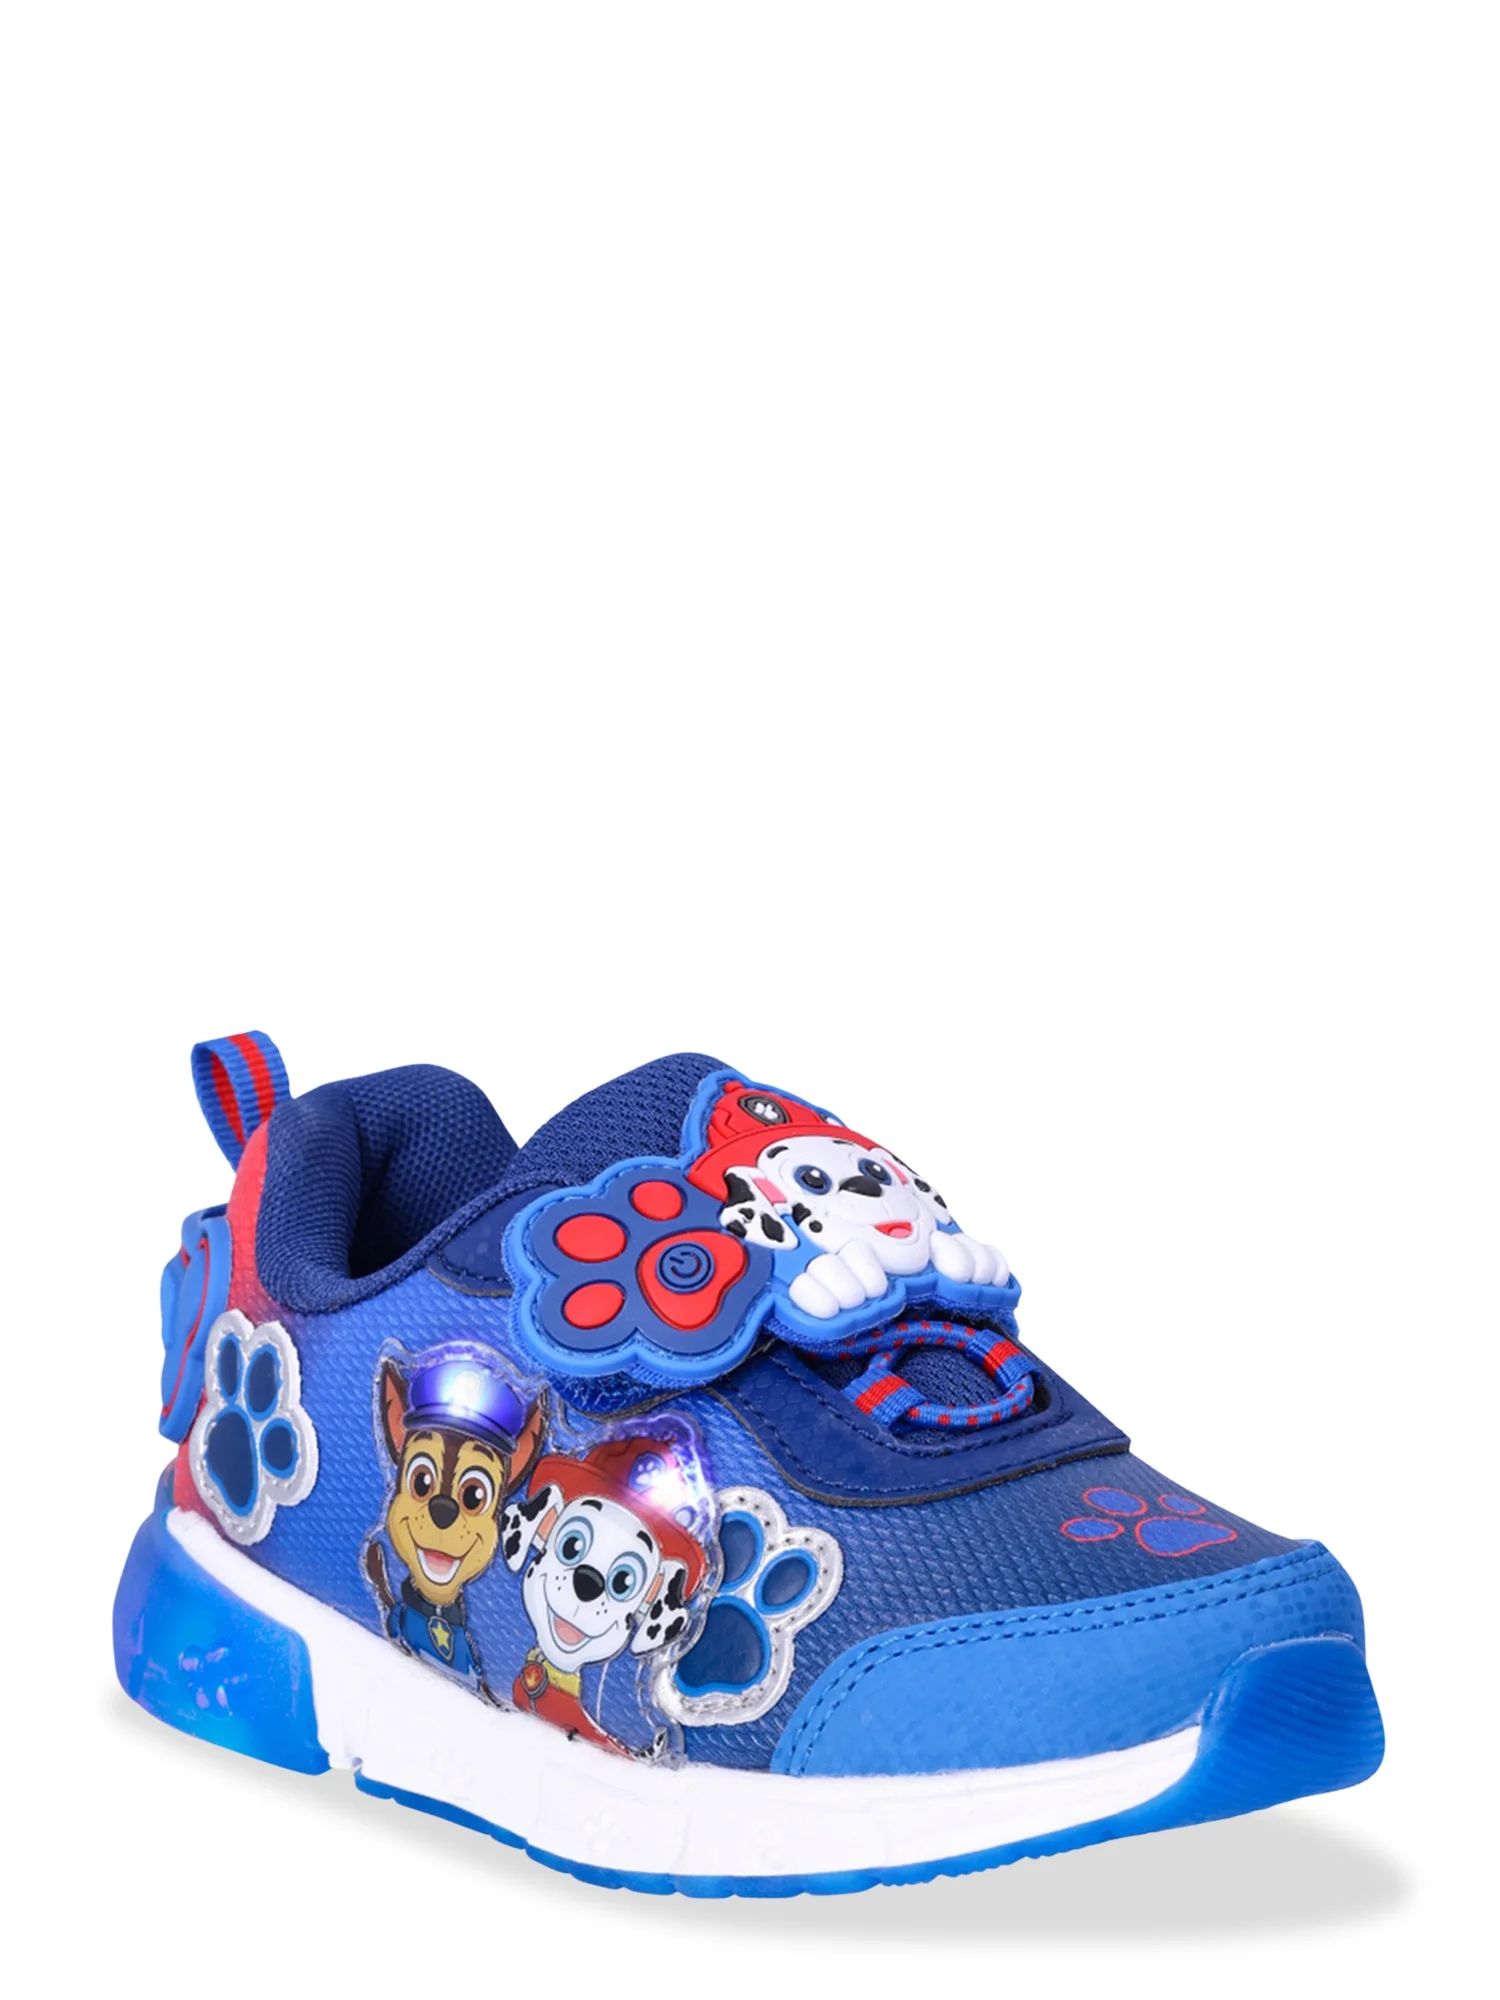 Paw Patrol Toddler Boys Light-Up Athletic Sneakers, Sizes 5-12 | Walmart (US)